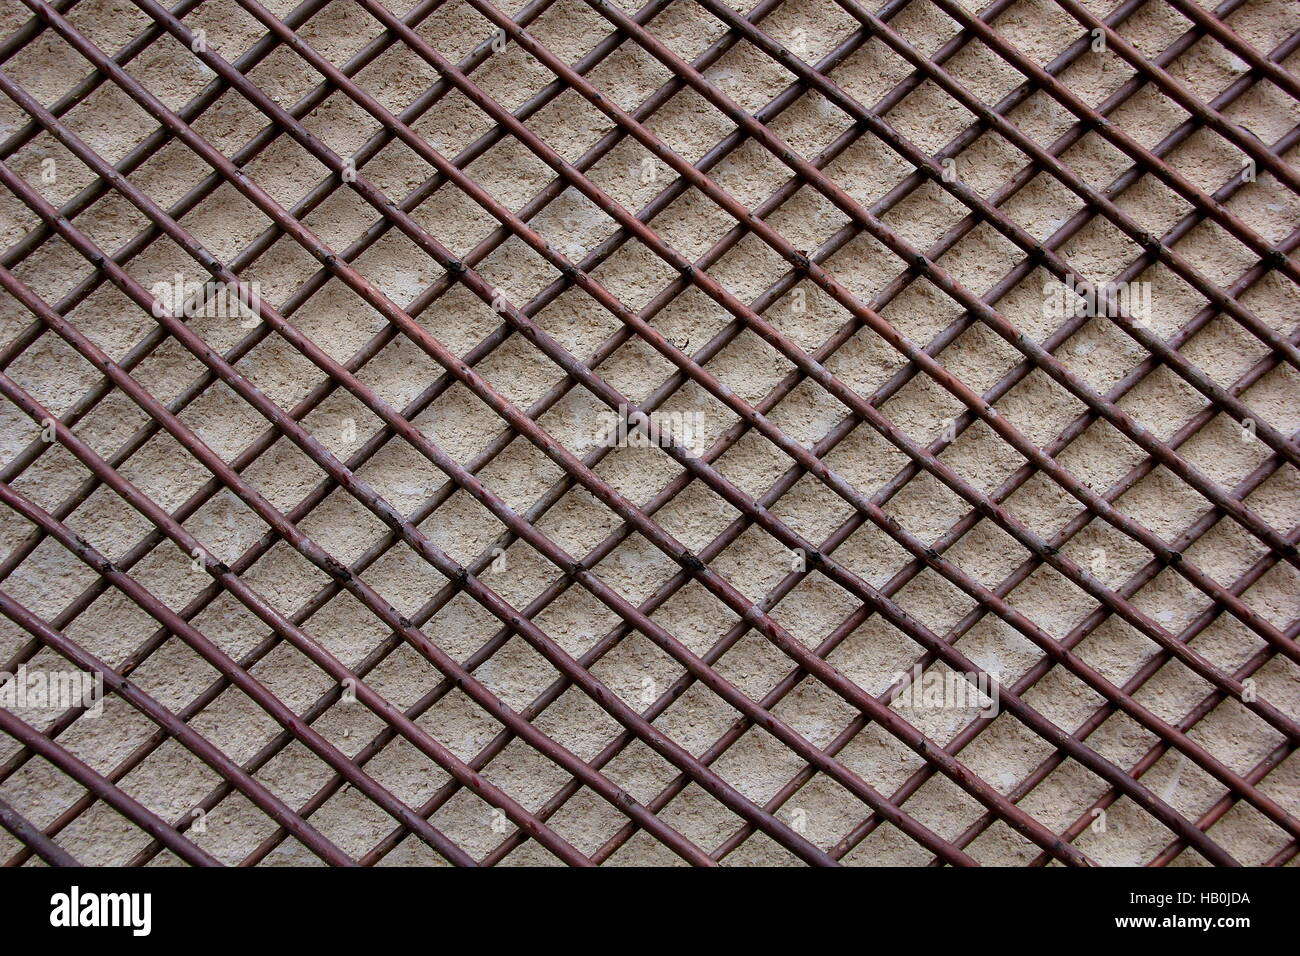 background of woven wooden sticks Stock Photo